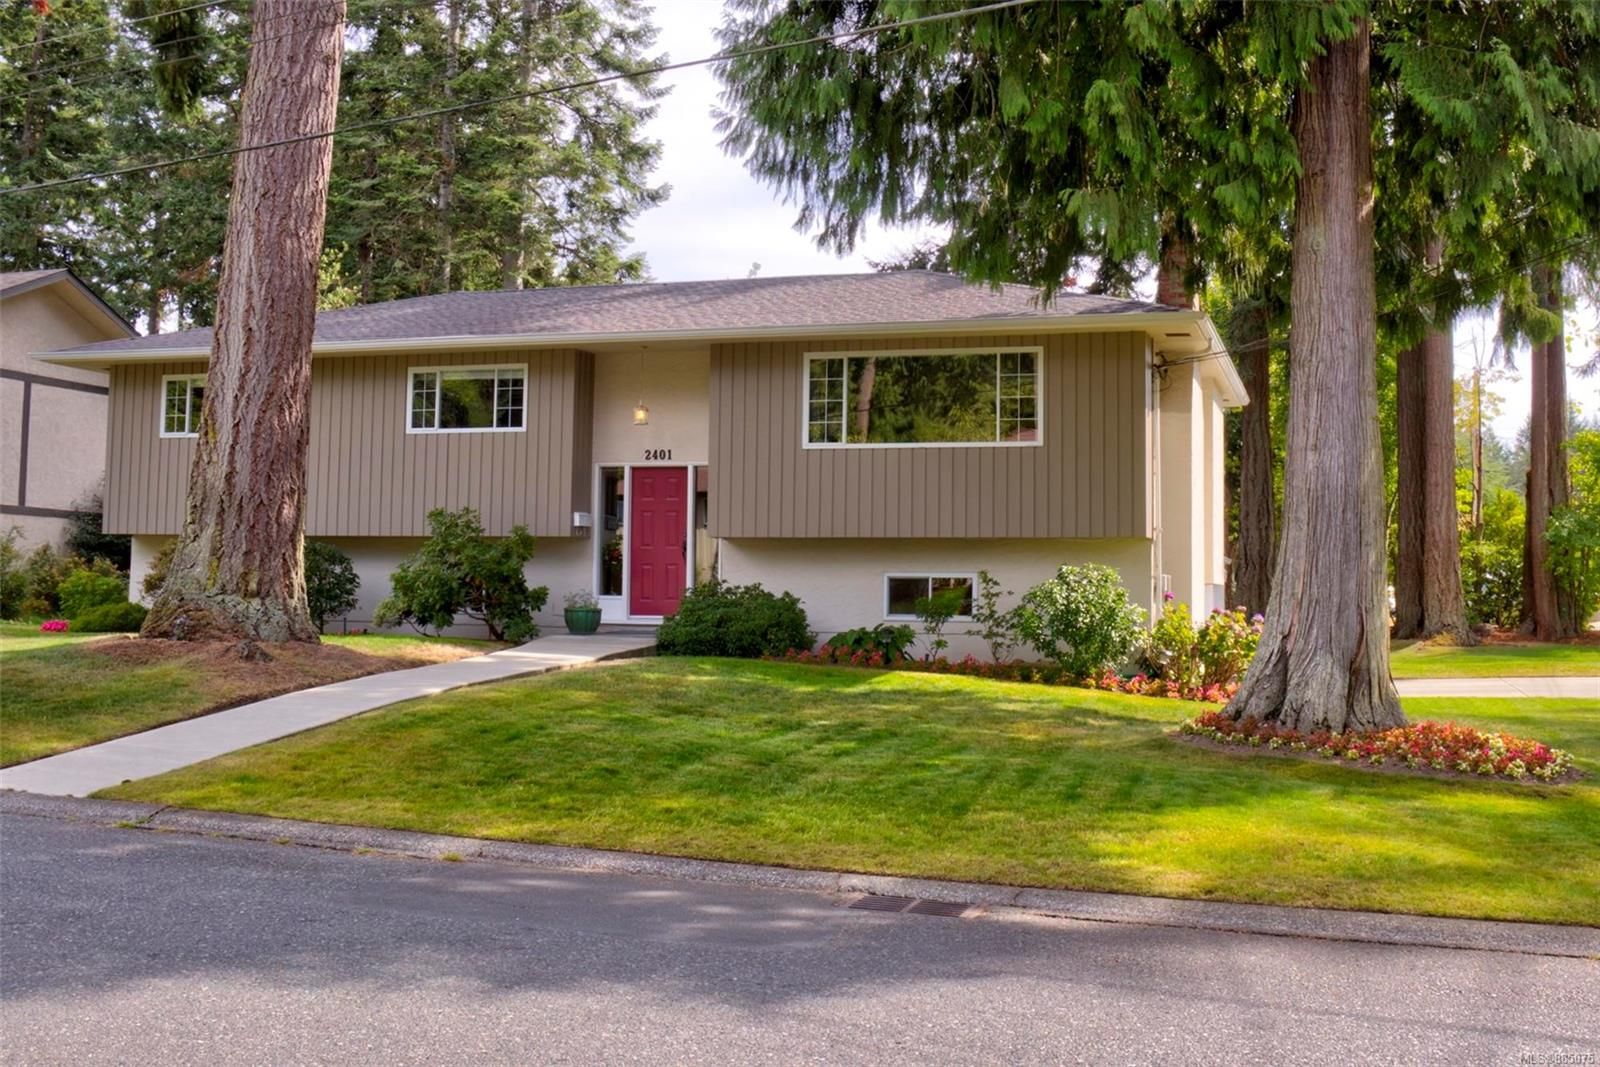 New property listed in CS Tanner, Central Saanich